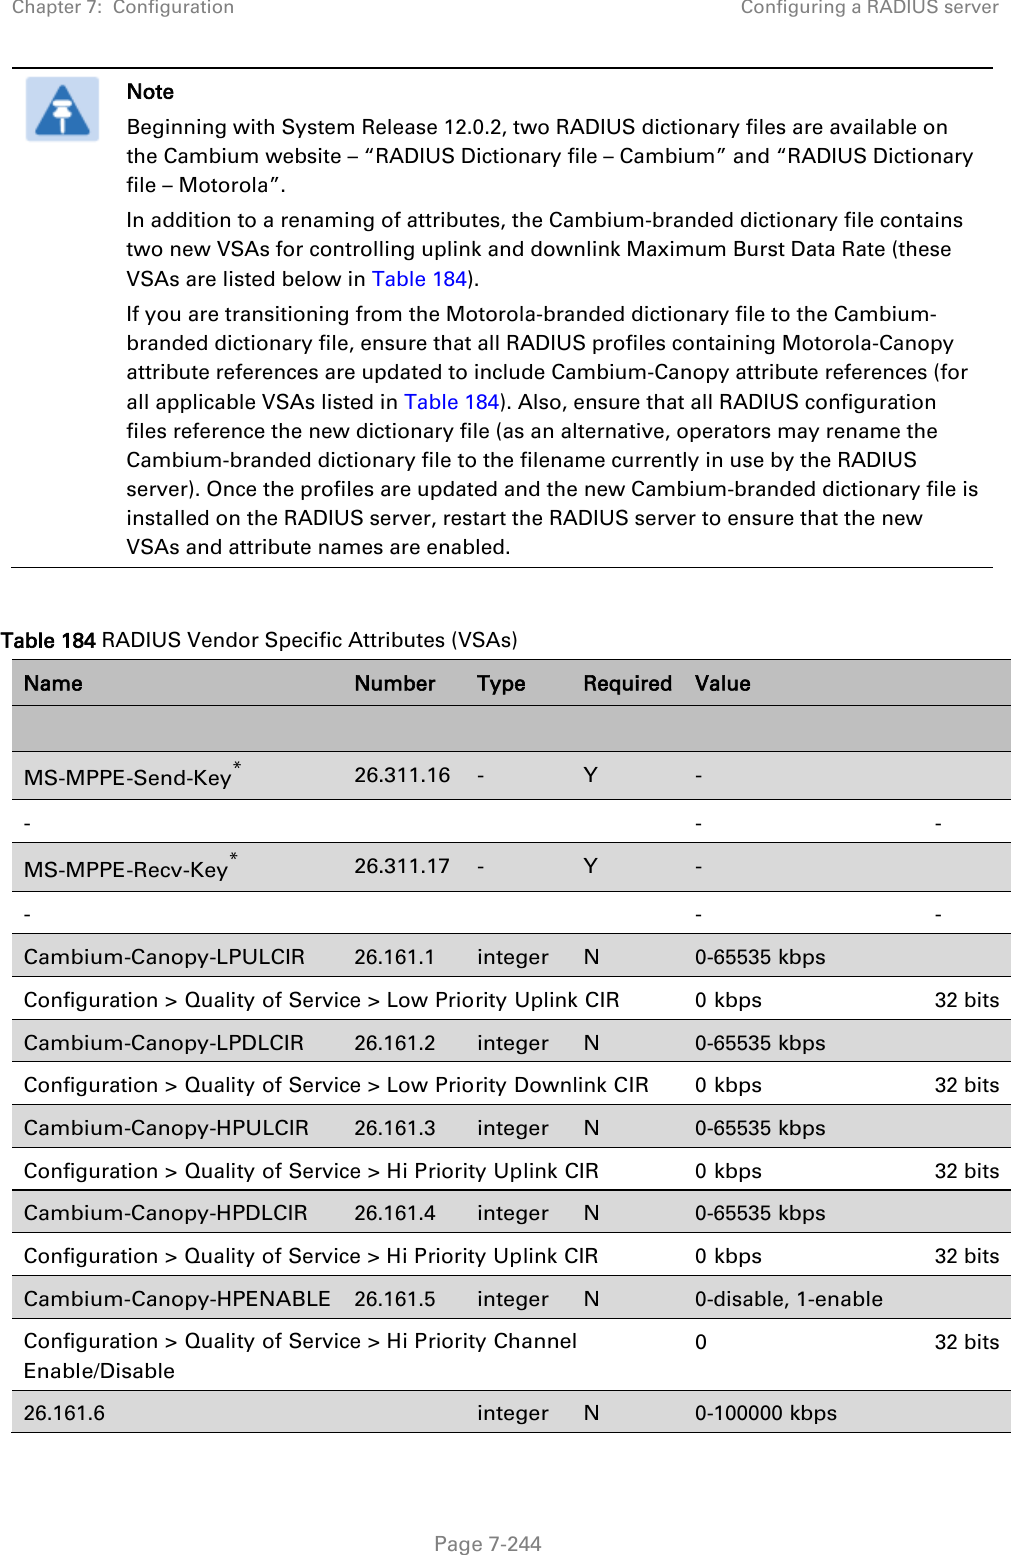 Chapter 7:  Configuration Configuring a RADIUS server   Page 7-244  Note Beginning with System Release 12.0.2, two RADIUS dictionary files are available on the Cambium website – “RADIUS Dictionary file – Cambium” and “RADIUS Dictionary file – Motorola”. In addition to a renaming of attributes, the Cambium-branded dictionary file contains two new VSAs for controlling uplink and downlink Maximum Burst Data Rate (these VSAs are listed below in Table 184). If you are transitioning from the Motorola-branded dictionary file to the Cambium-branded dictionary file, ensure that all RADIUS profiles containing Motorola-Canopy attribute references are updated to include Cambium-Canopy attribute references (for all applicable VSAs listed in Table 184). Also, ensure that all RADIUS configuration files reference the new dictionary file (as an alternative, operators may rename the Cambium-branded dictionary file to the filename currently in use by the RADIUS server). Once the profiles are updated and the new Cambium-branded dictionary file is installed on the RADIUS server, restart the RADIUS server to ensure that the new VSAs and attribute names are enabled.  Table 184 RADIUS Vendor Specific Attributes (VSAs) Name Number Type Required Value        MS-MPPE-Send-Key* 26.311.16 - Y -   -        -  - MS-MPPE-Recv-Key* 26.311.17 - Y -   -       - - Cambium-Canopy-LPULCIR 26.161.1  integer  N 0-65535 kbps   Configuration &gt; Quality of Service &gt; Low Priority Uplink CIR 0 kbps 32 bits Cambium-Canopy-LPDLCIR 26.161.2 integer  N  0-65535 kbps   Configuration &gt; Quality of Service &gt; Low Priority Downlink CIR 0 kbps 32 bits Cambium-Canopy-HPULCIR 26.161.3 integer N 0-65535 kbps   Configuration &gt; Quality of Service &gt; Hi Priority Uplink CIR 0 kbps 32 bits Cambium-Canopy-HPDLCIR 26.161.4 integer N 0-65535 kbps   Configuration &gt; Quality of Service &gt; Hi Priority Uplink CIR 0 kbps 32 bits Cambium-Canopy-HPENABLE 26.161.5 integer N 0-disable, 1-enable   Configuration &gt; Quality of Service &gt; Hi Priority Channel Enable/Disable 0 32 bits 26.161.6   integer N  0-100000 kbps   